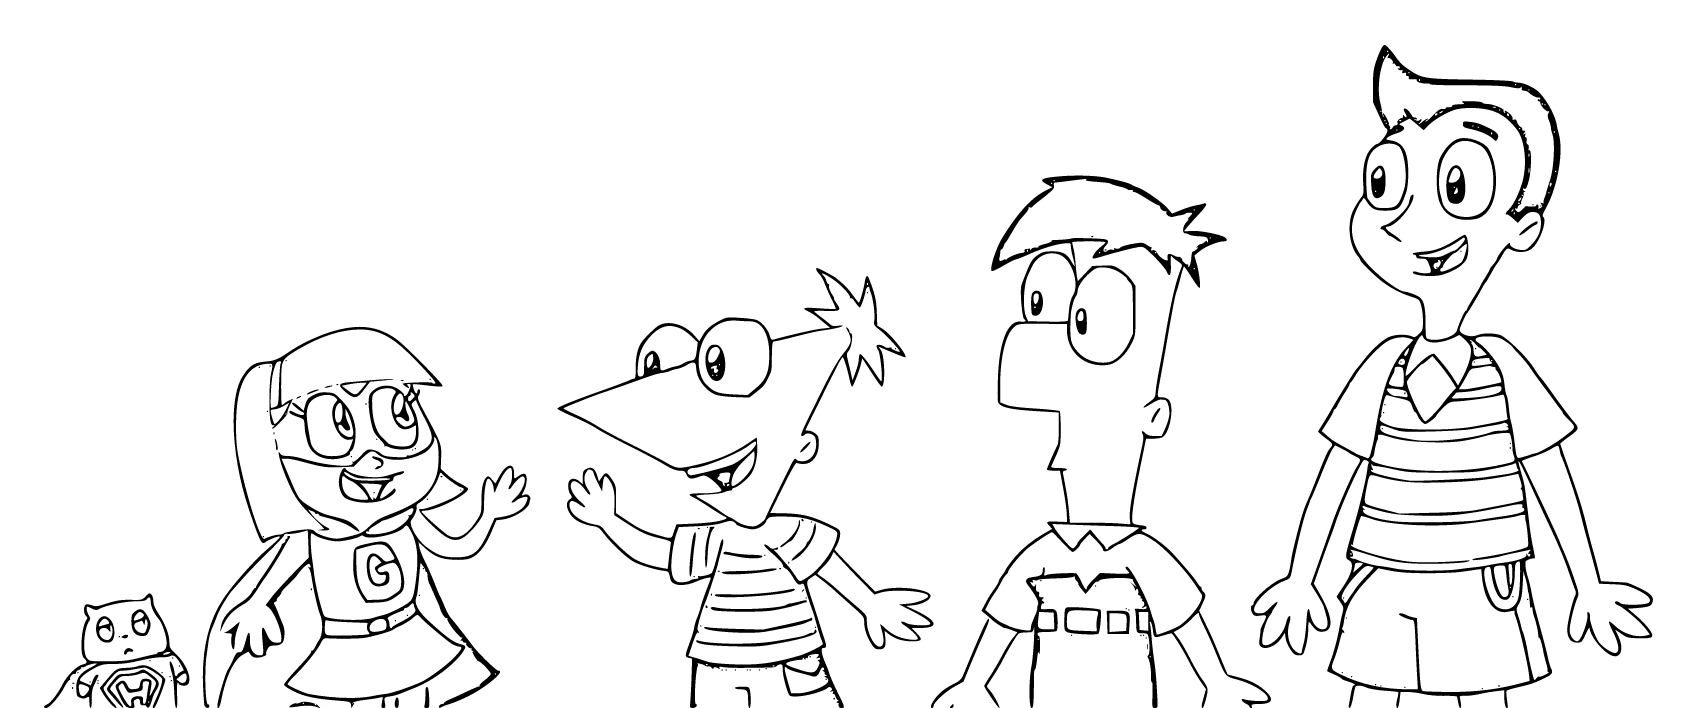 Printable Gretel, Hamster, Phineas, Ferb, Milo outline for ! Coloring Page for kids.